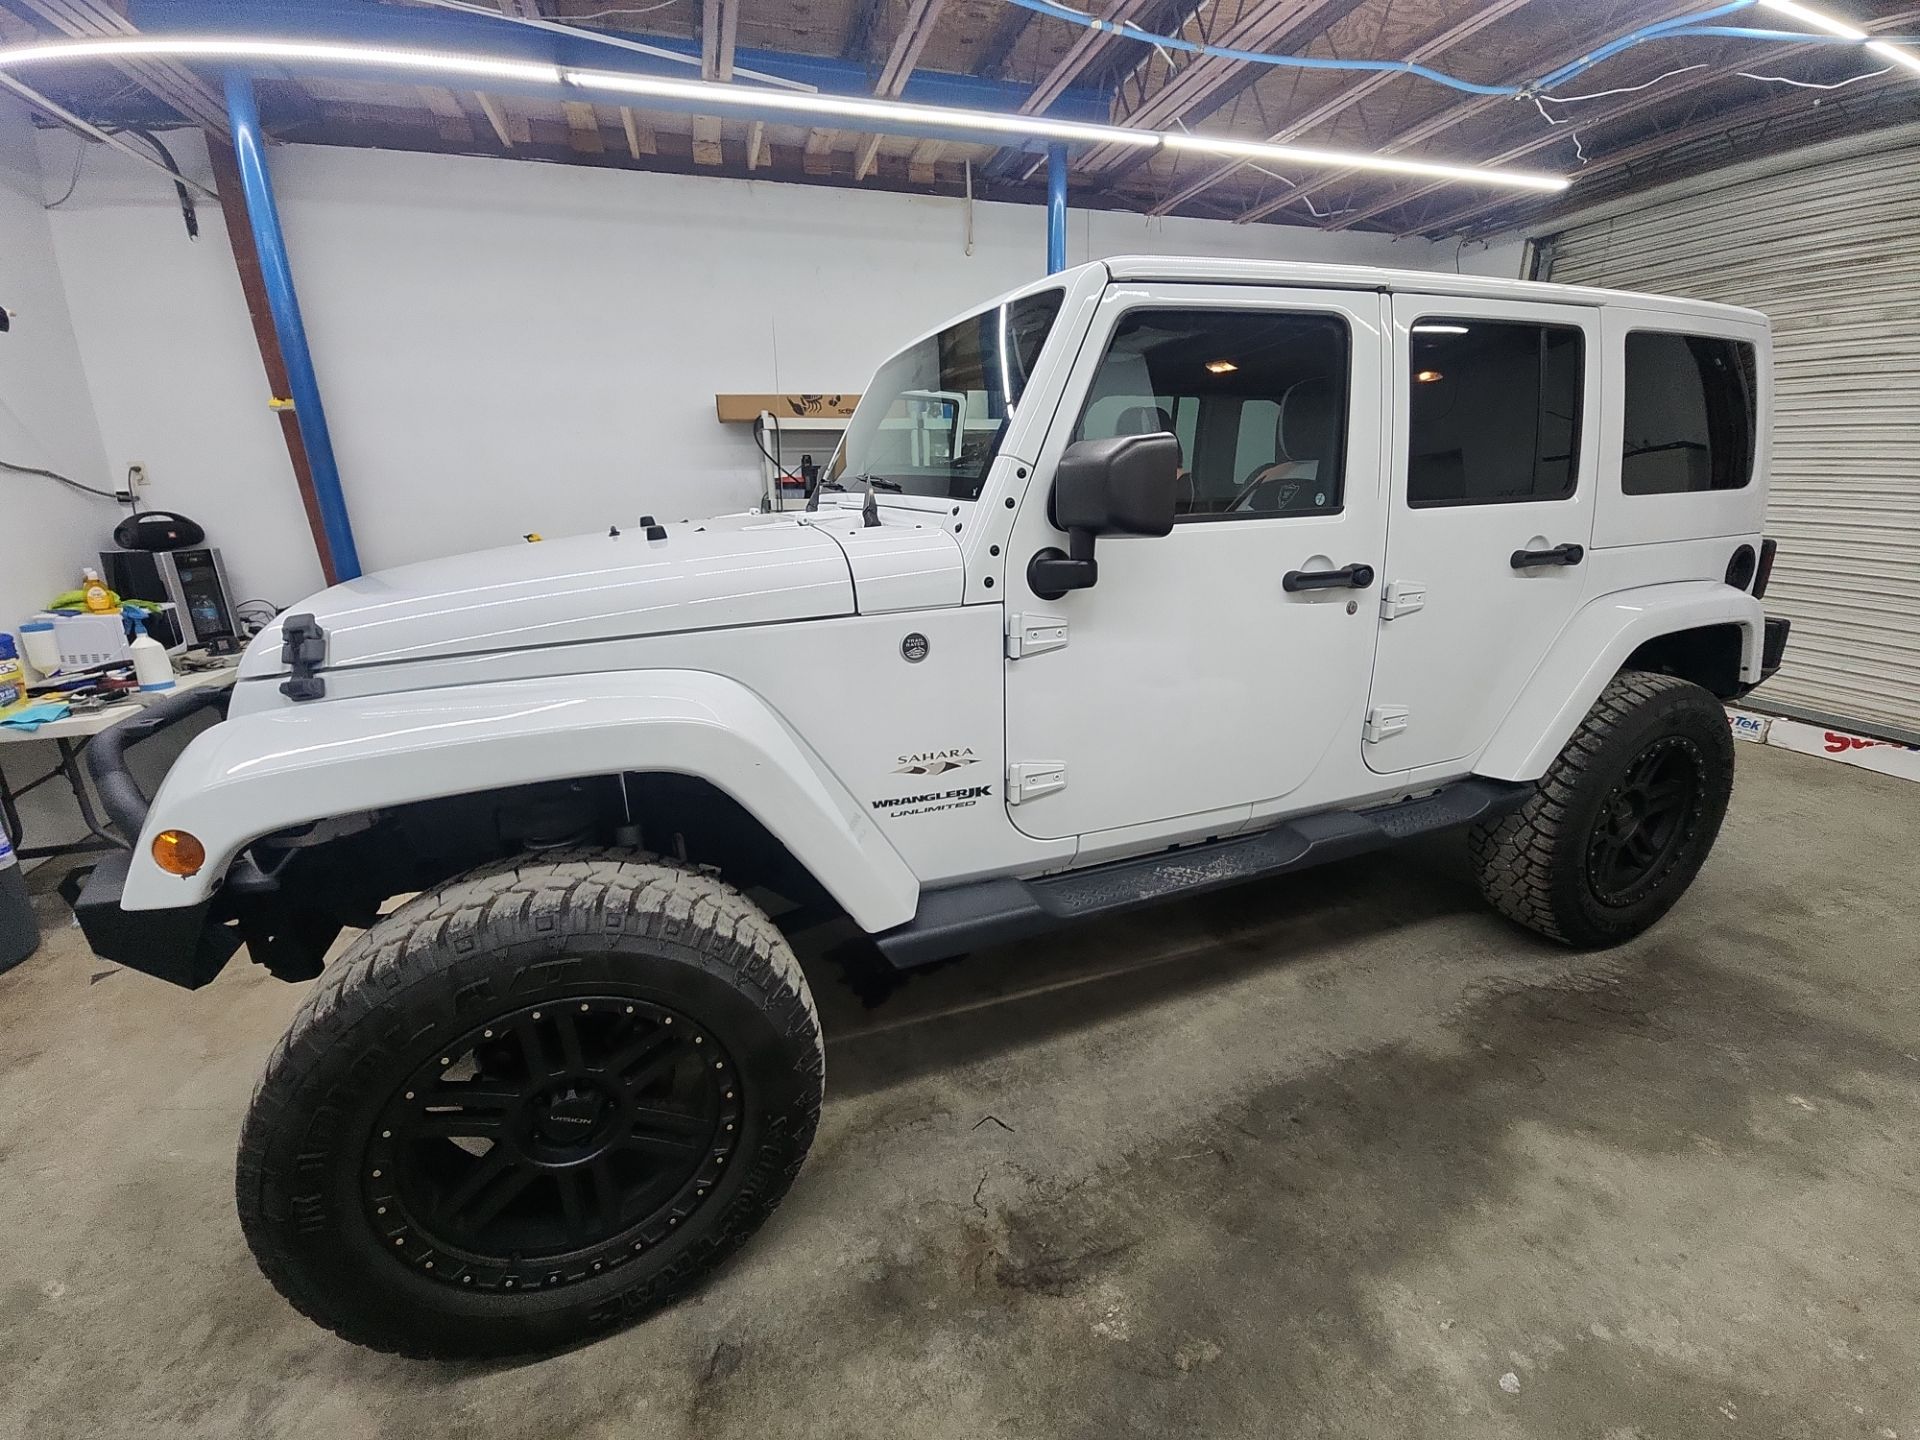 the image shows a white jeep wrangler in a garage likely undergoing window tinting by the company mentioned the jeep has multiple doors and windows which will have a film applied to them for reducing glare and heat as well as providing privacy the process involves cleaning the windows cutting and shaping the tint material and applying it carefully to avoid bubbles and imperfections the surroundings suggest this service is being done indoors to minimize dust and debris during application